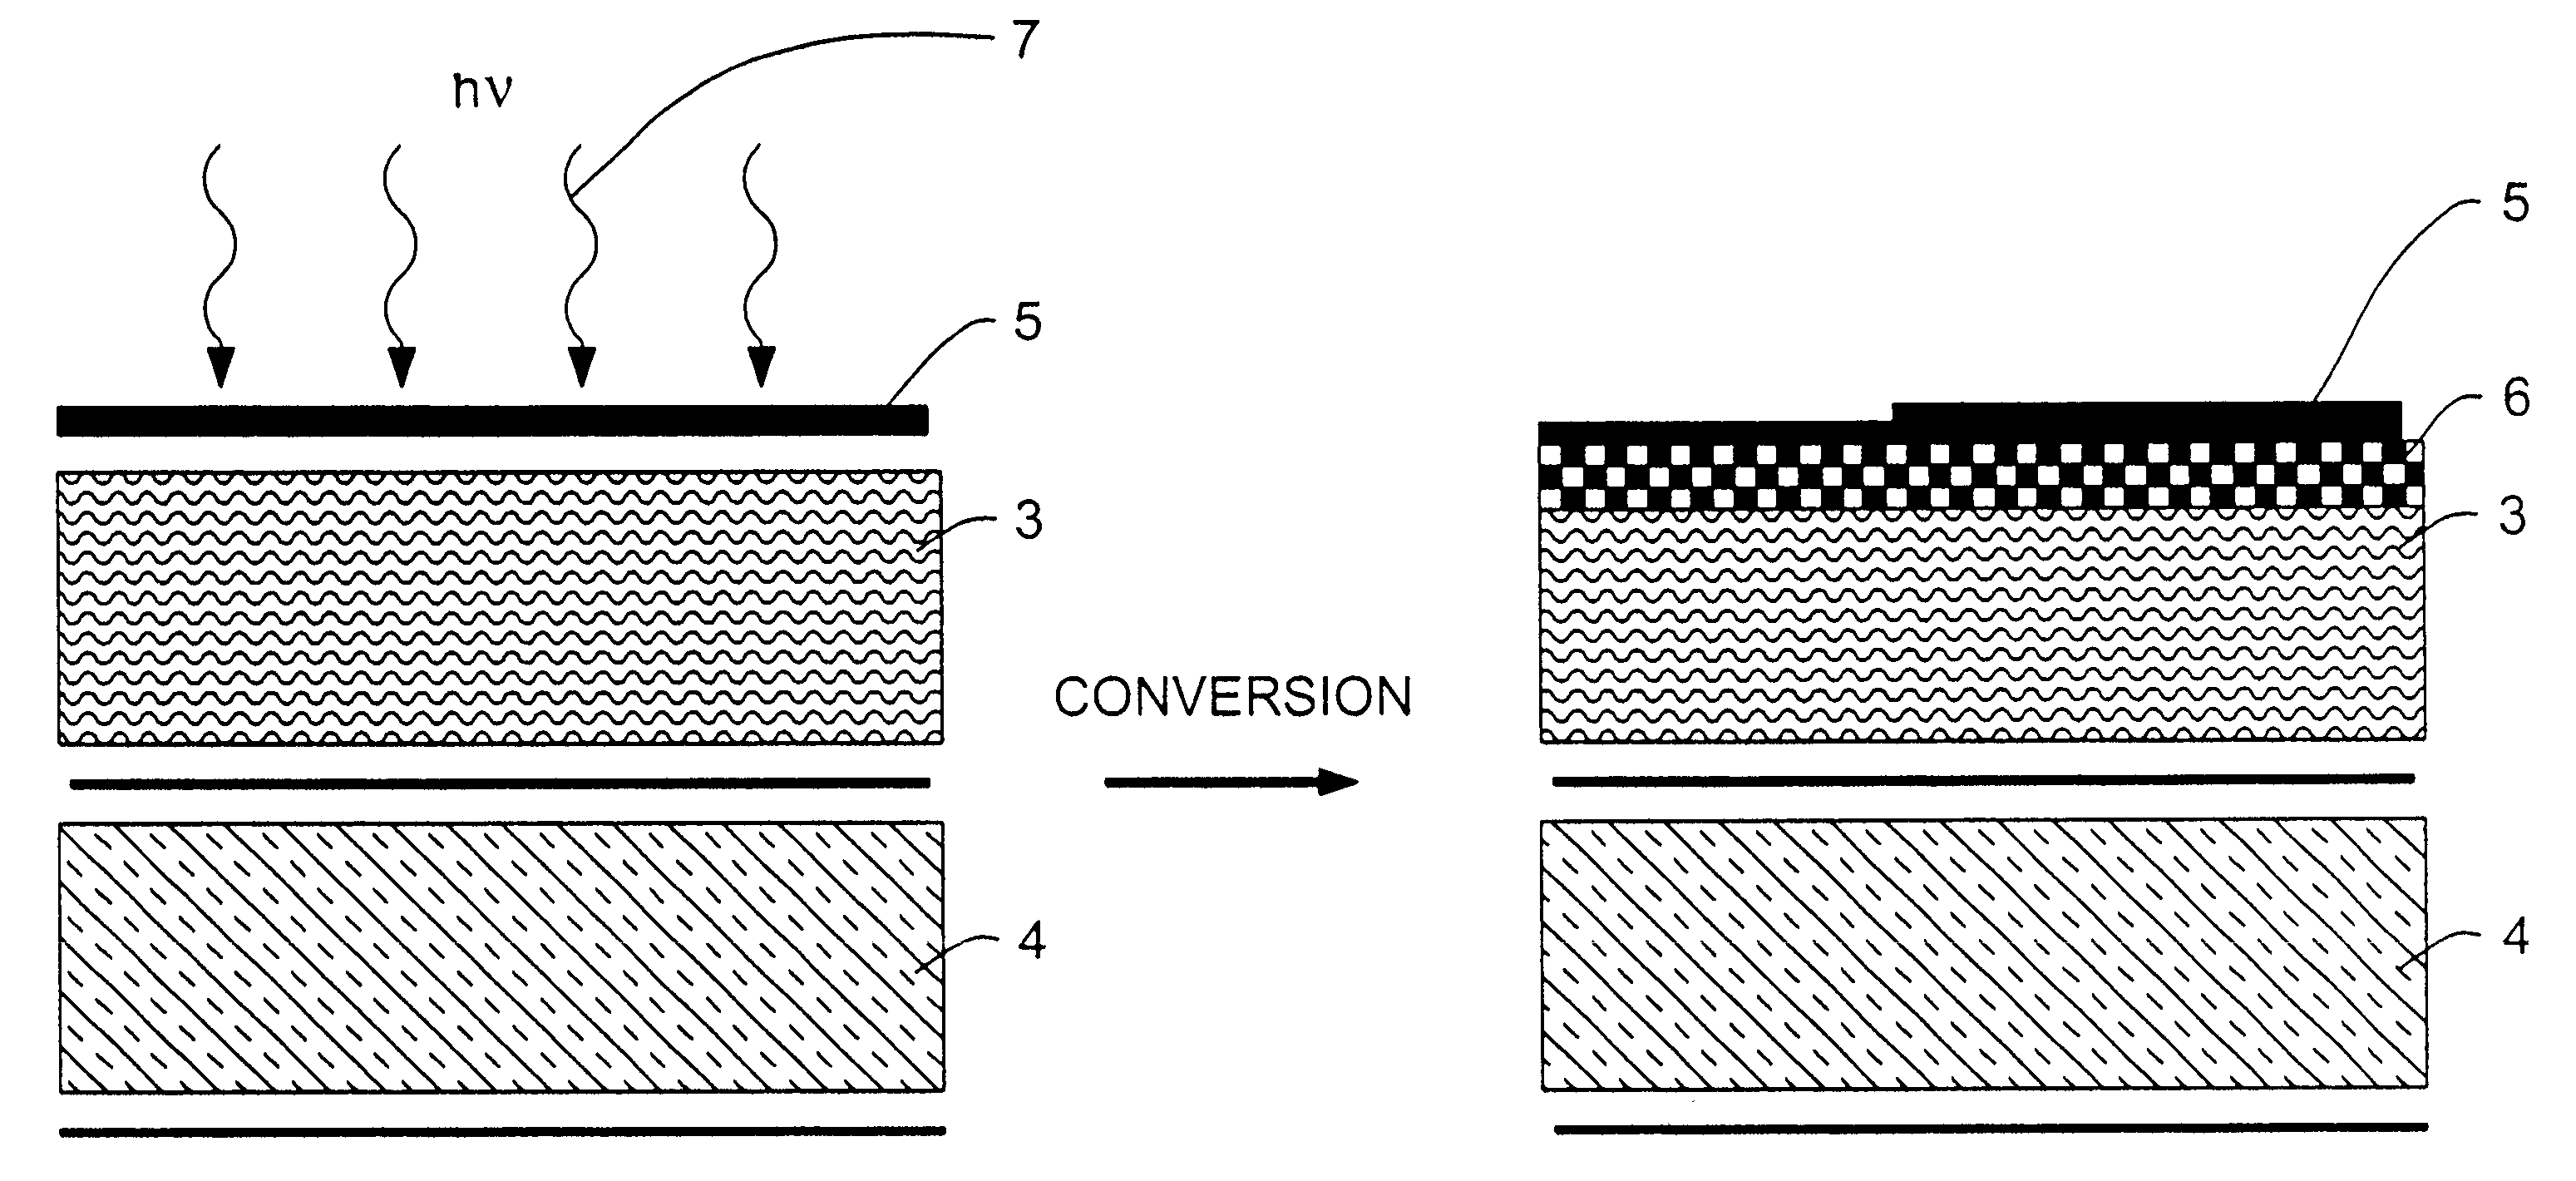 Method for obtaining reduced thermal flux in silicone resin composites